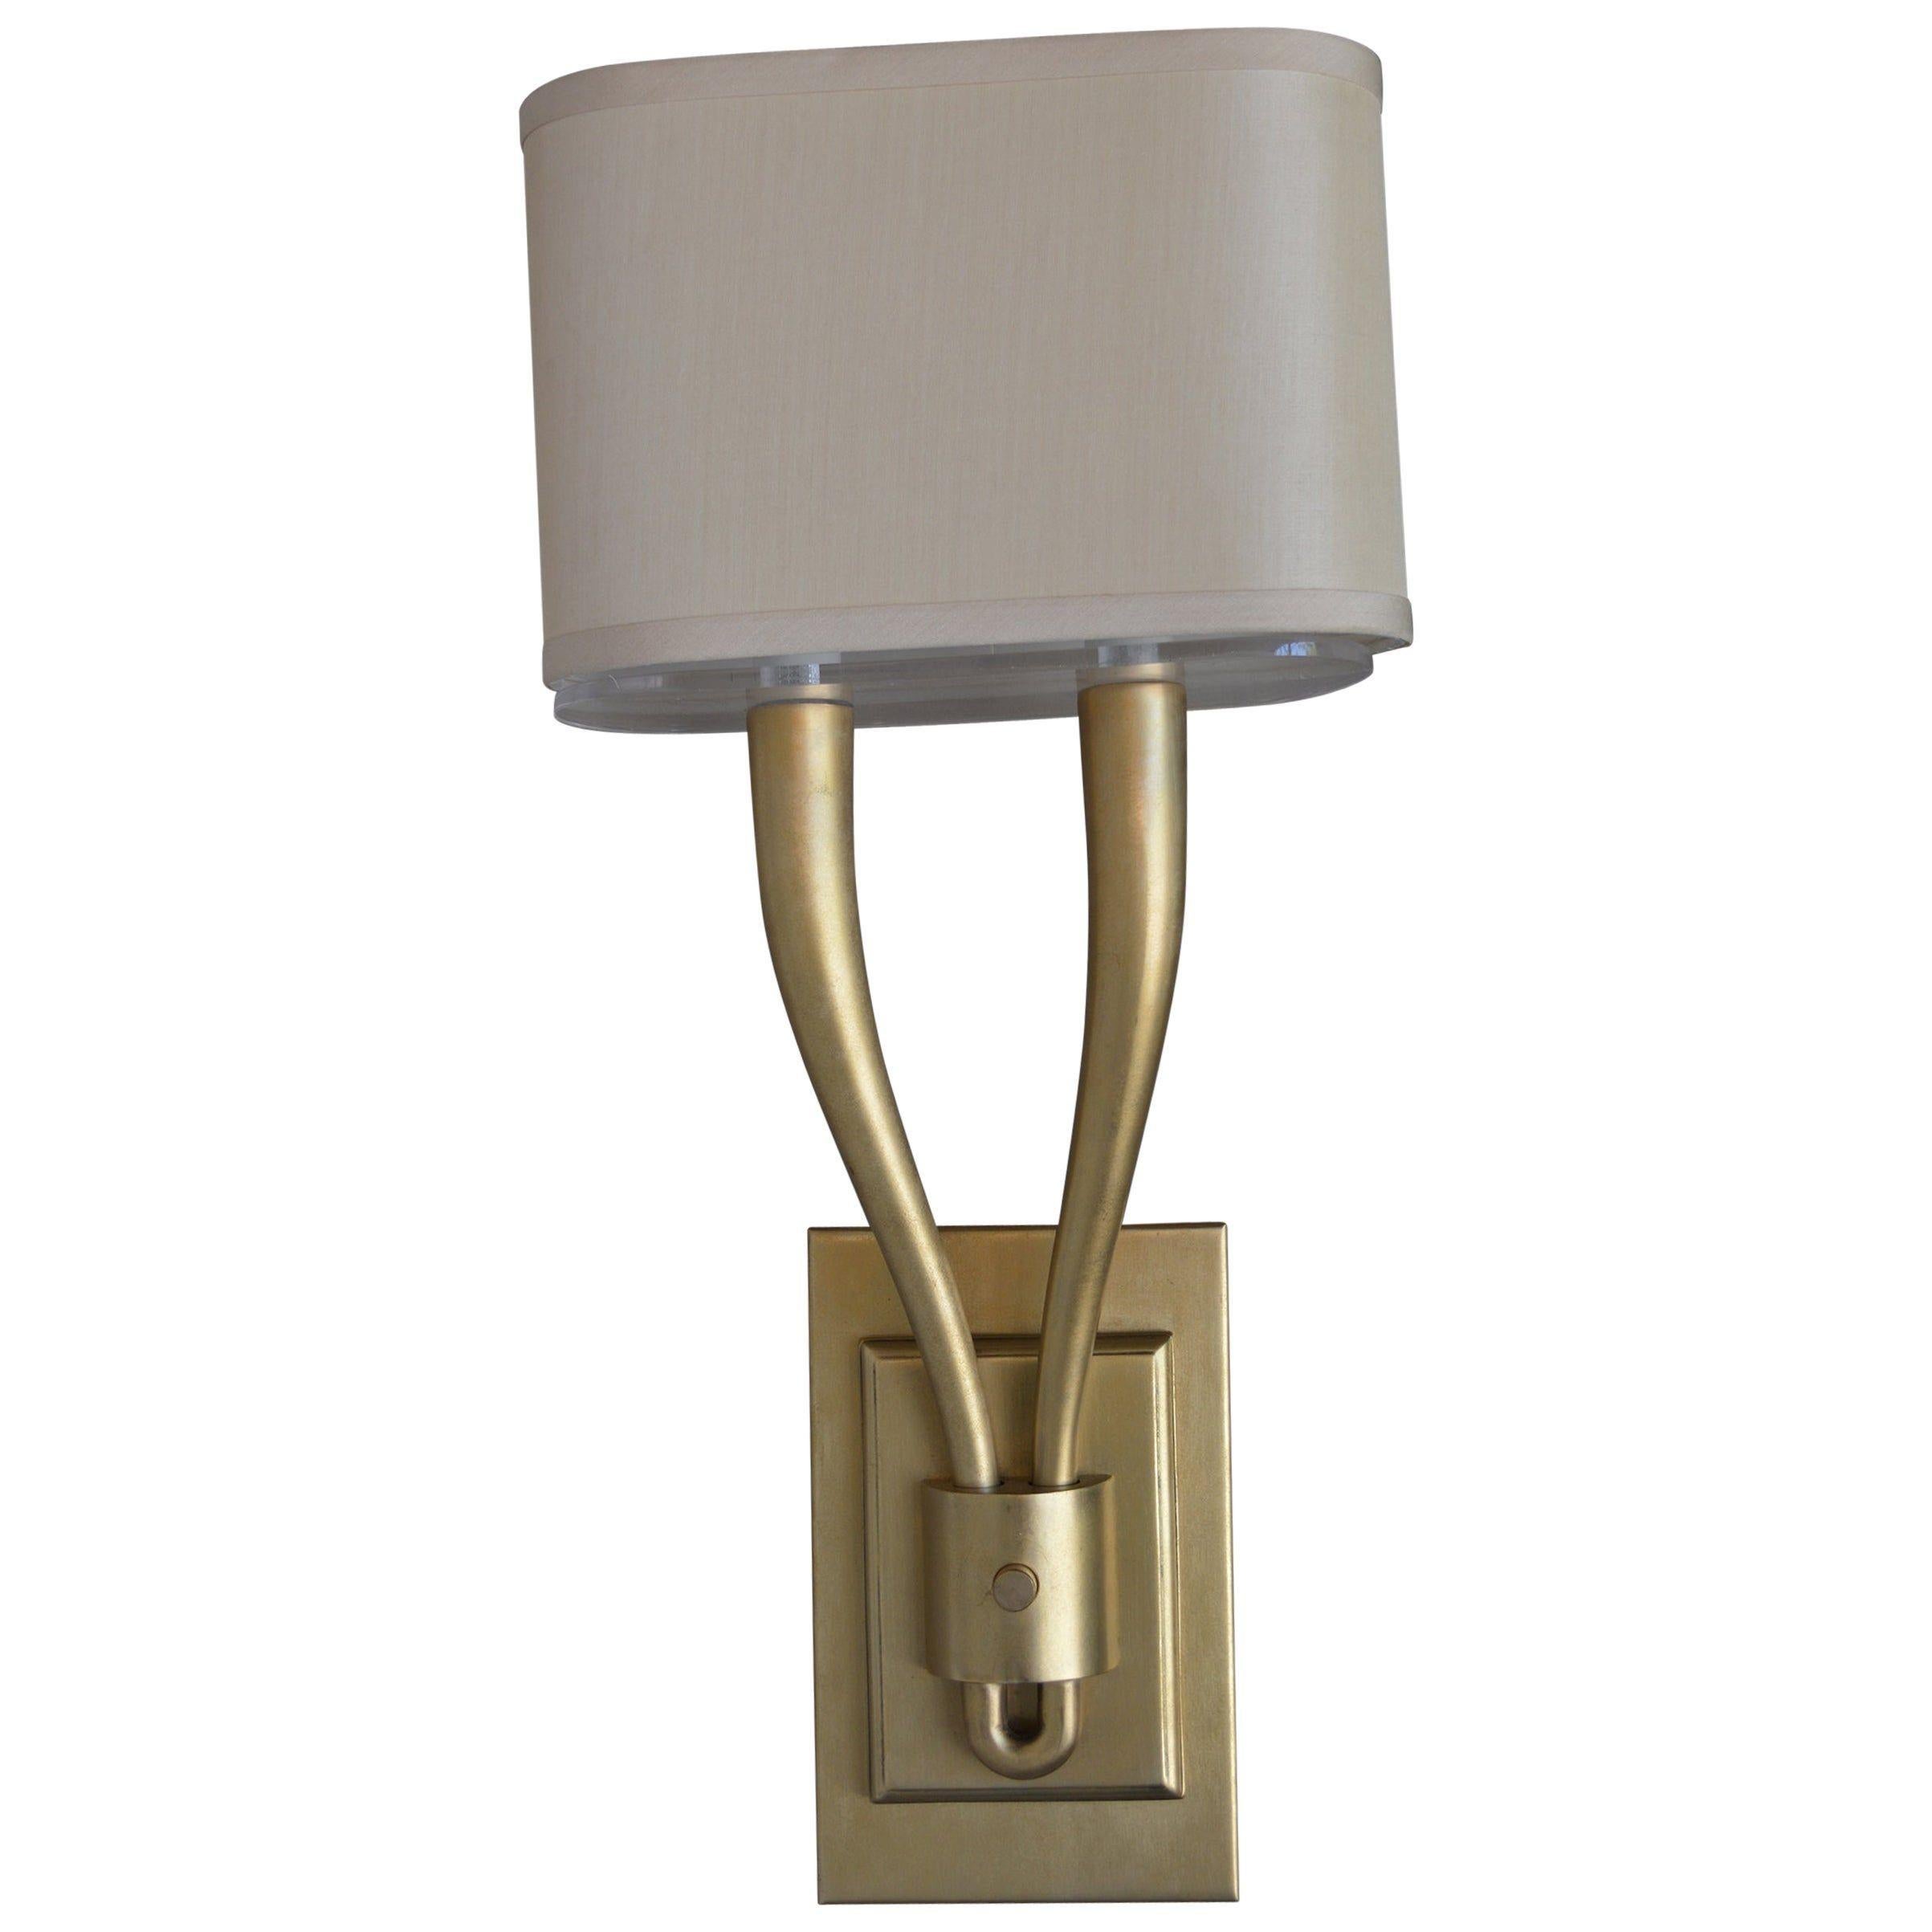 Two arm brushed brass sconces with shades.